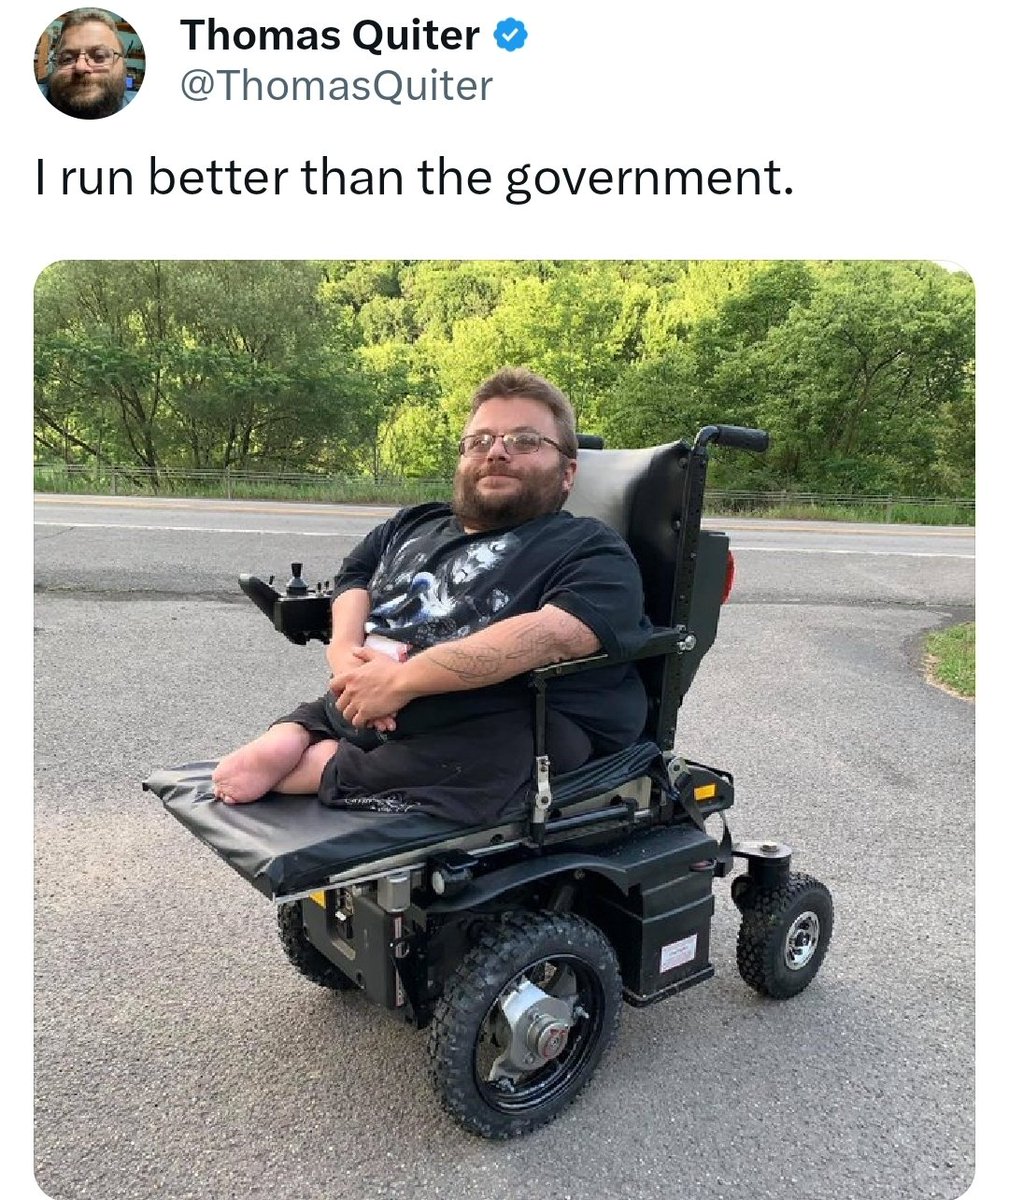 You've seen this meme. Now let me tell you about the man behind it. Thomas Quiter was born with osteogenesis imperfecta. His parents were told that he wouldn't survive more than a matter of days. He is now 40. The thing about osteogenesis imperfecta is it requires a very…